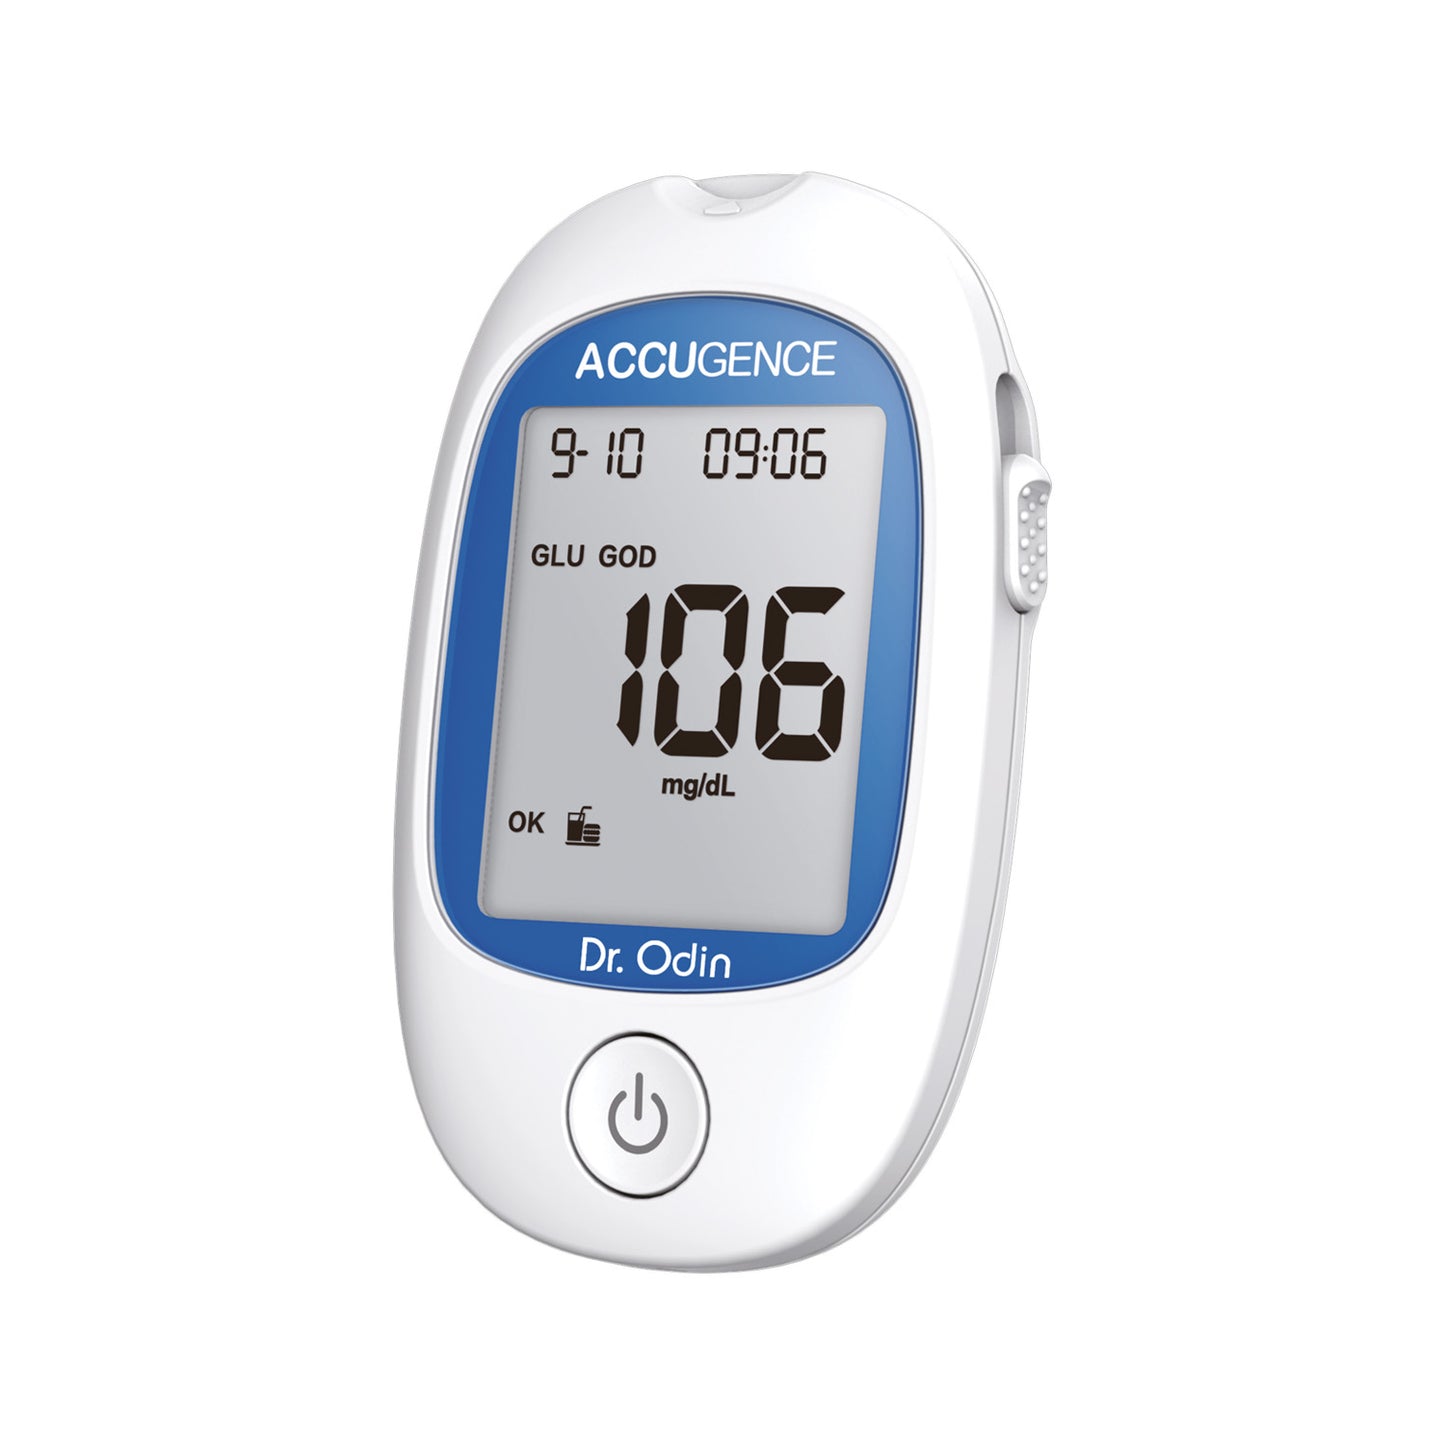 Accugence Blood Glucose Meter Only - PM900